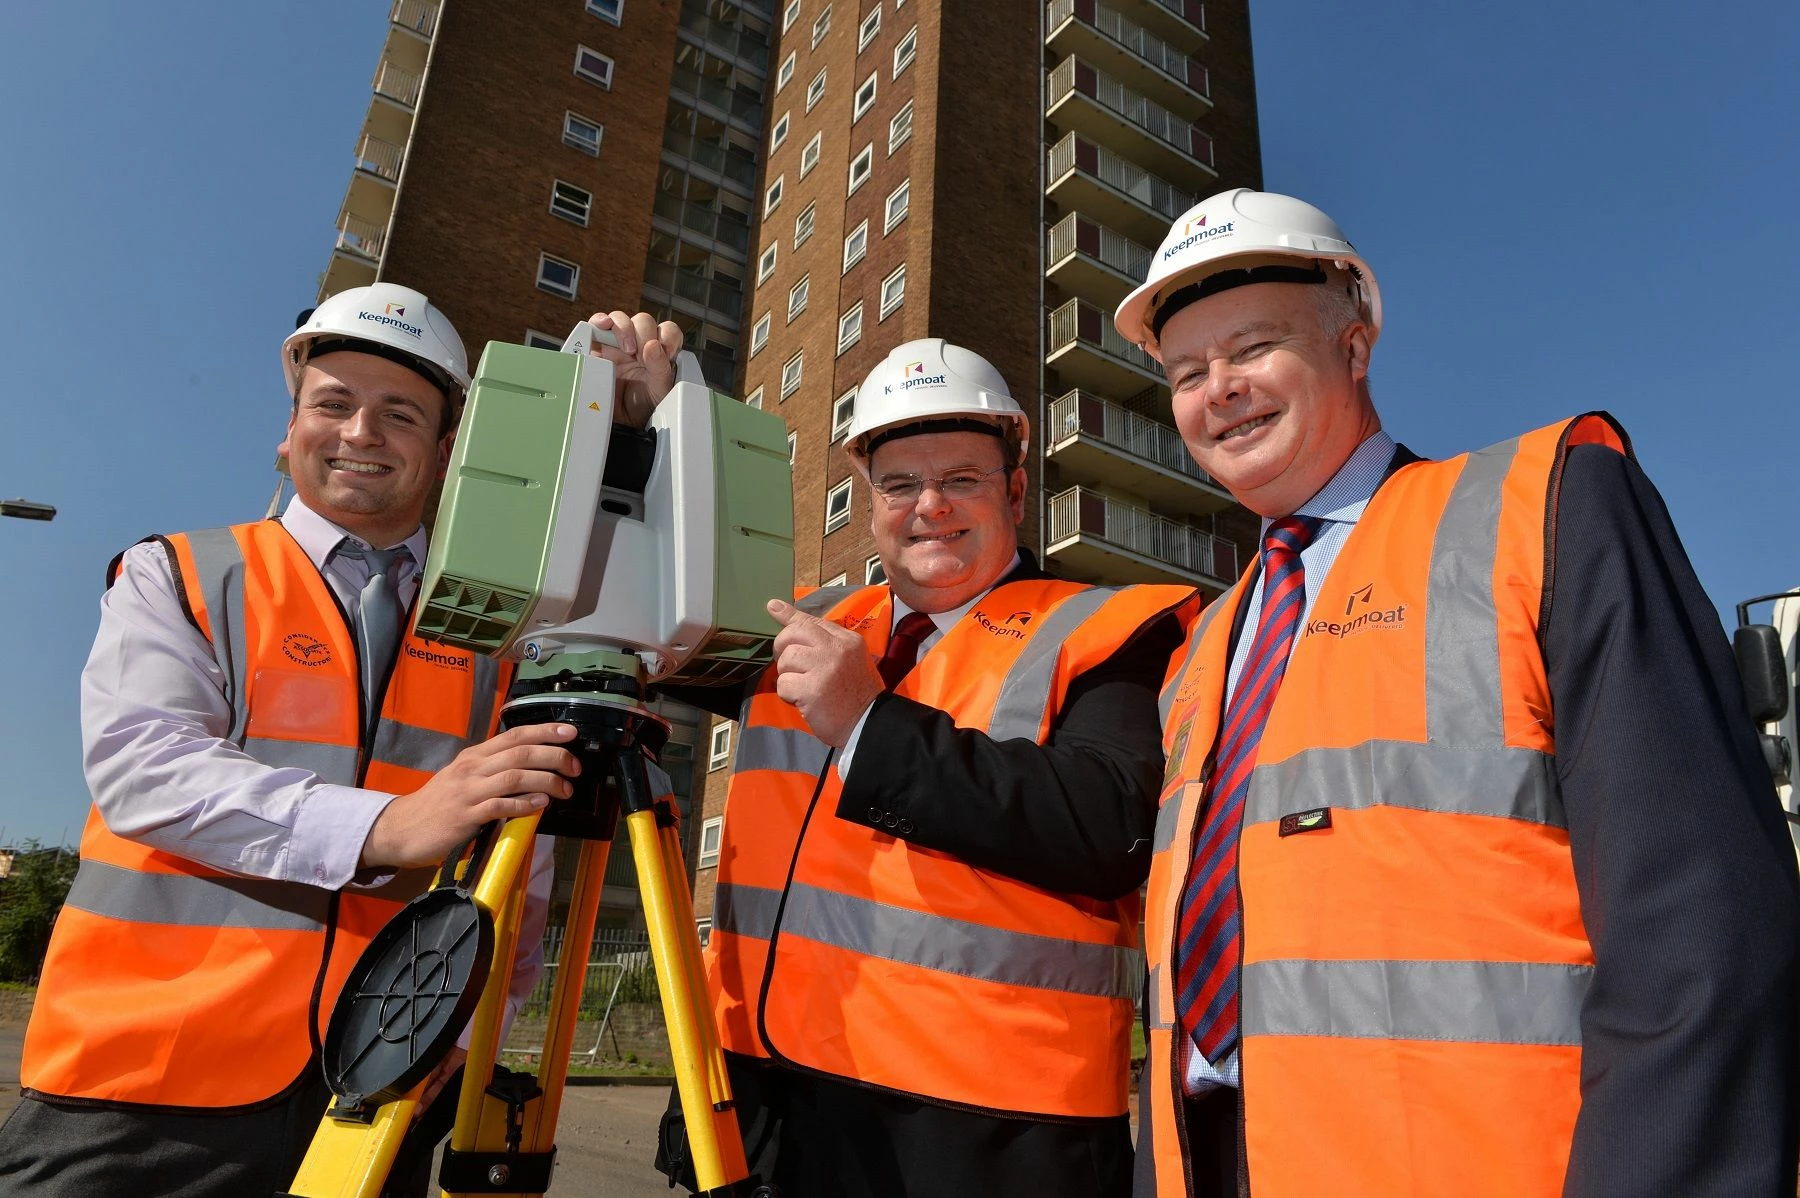 L-R John O’Leary, Site Manager, Cllr Darren Cooper, Leader of Sandwell Council and Neil Baxter, Regi